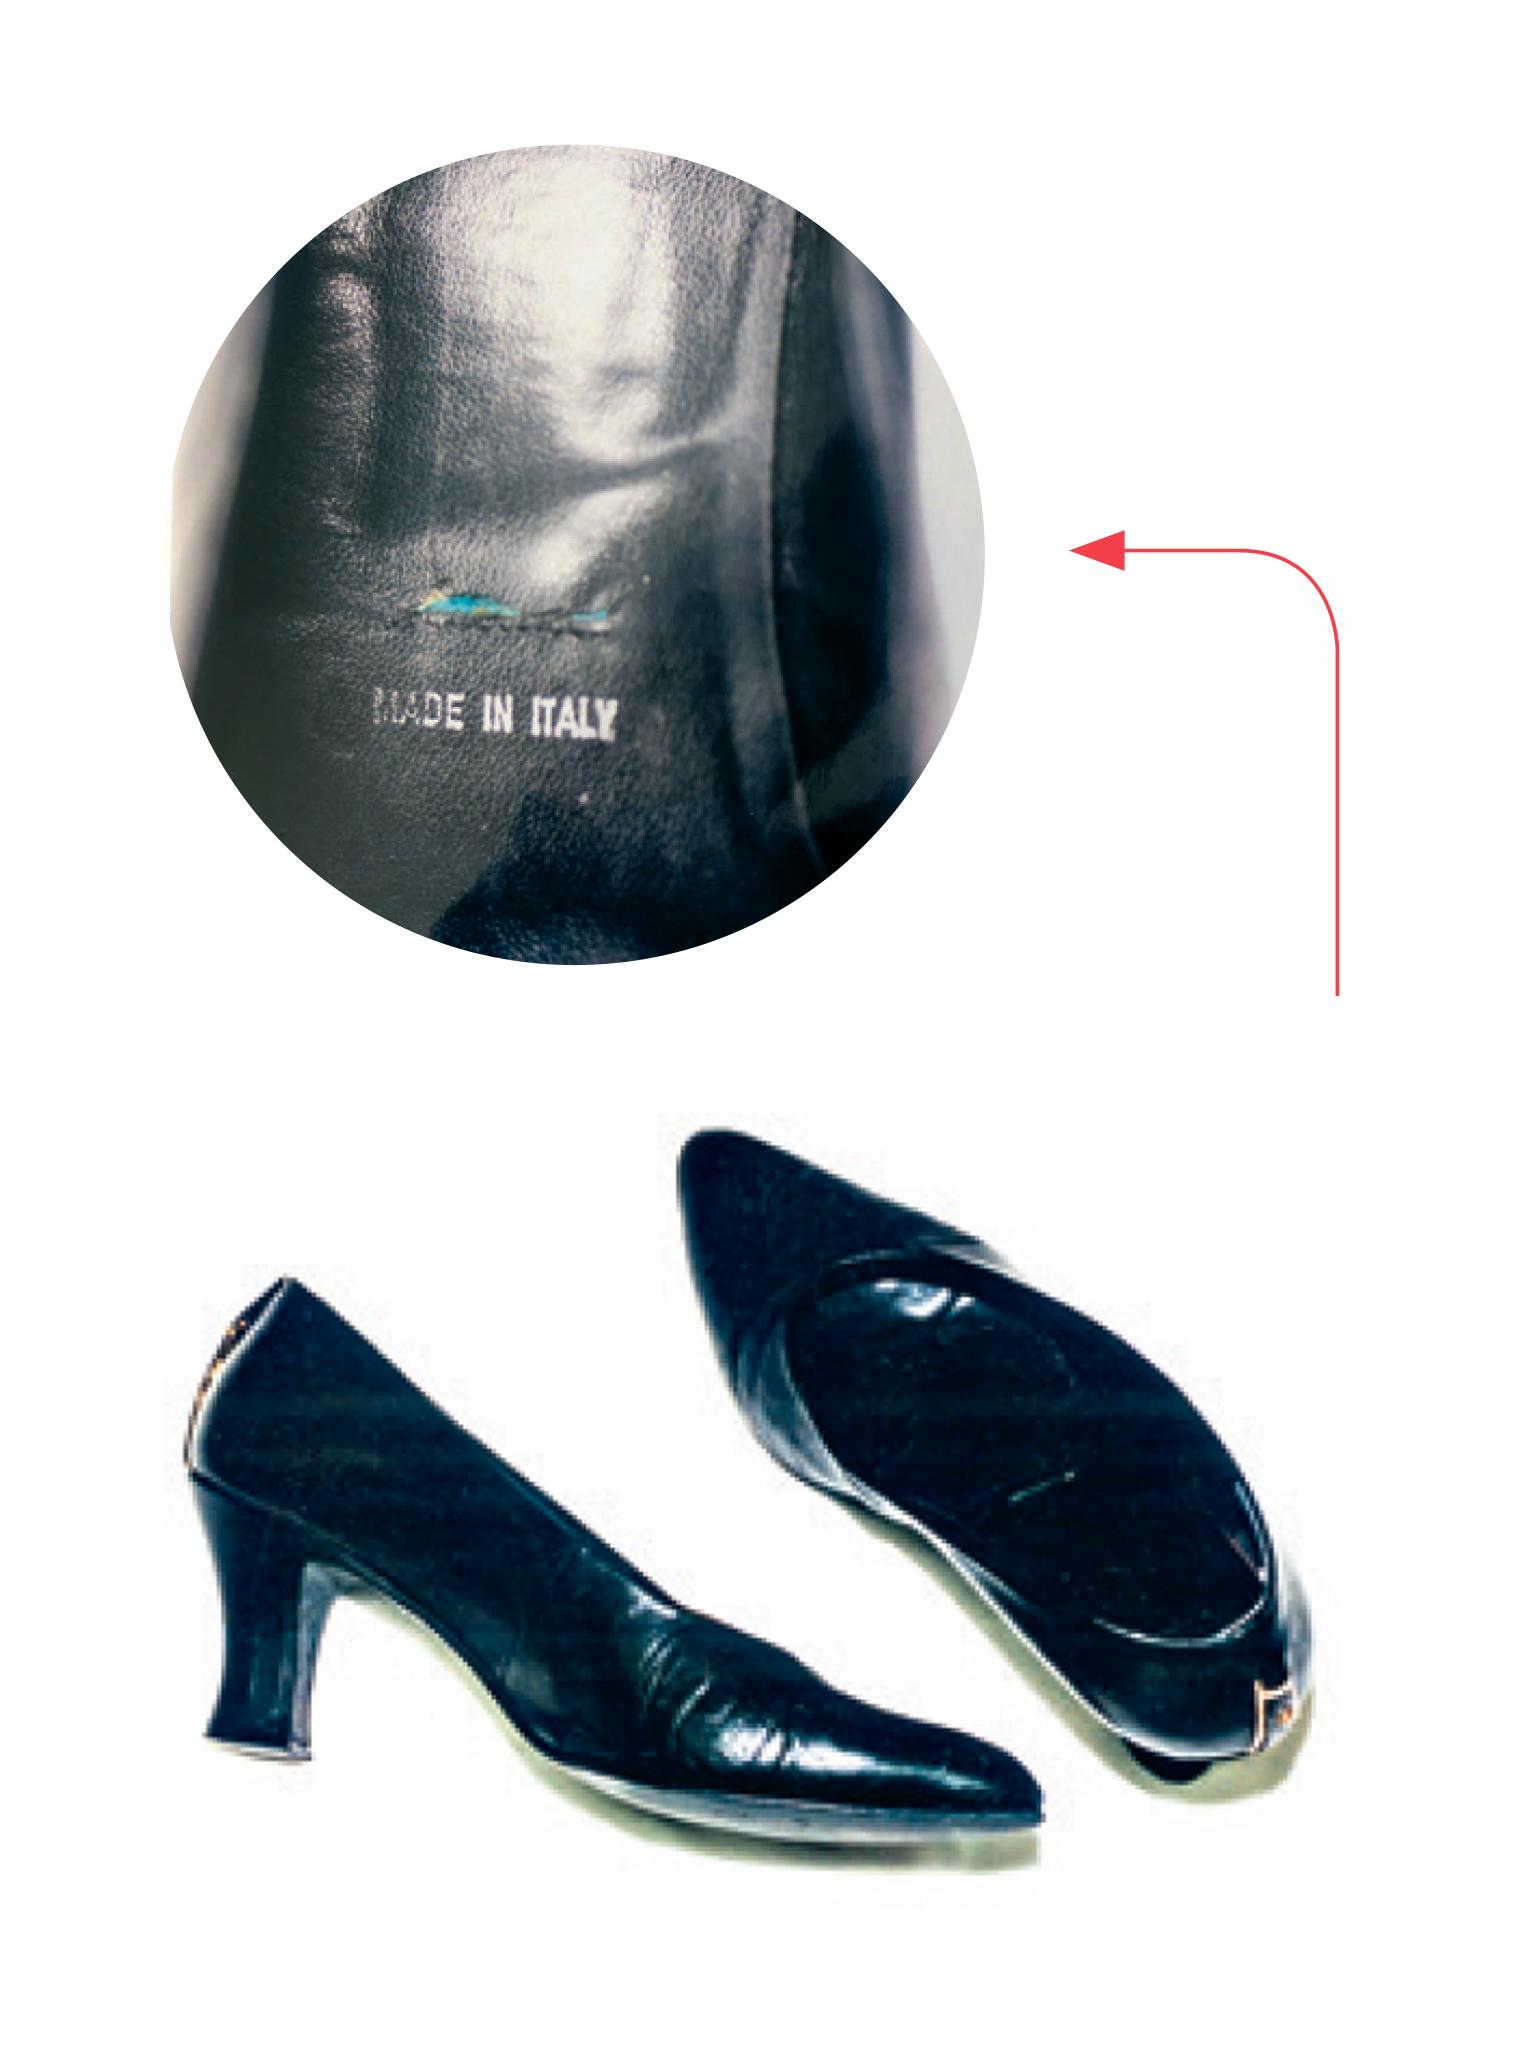 Labels were systematically removed from the woman’s clothes. Even the shoe manufacturer’s name was removed from the insoles of her shoes. Photo: POLICE.